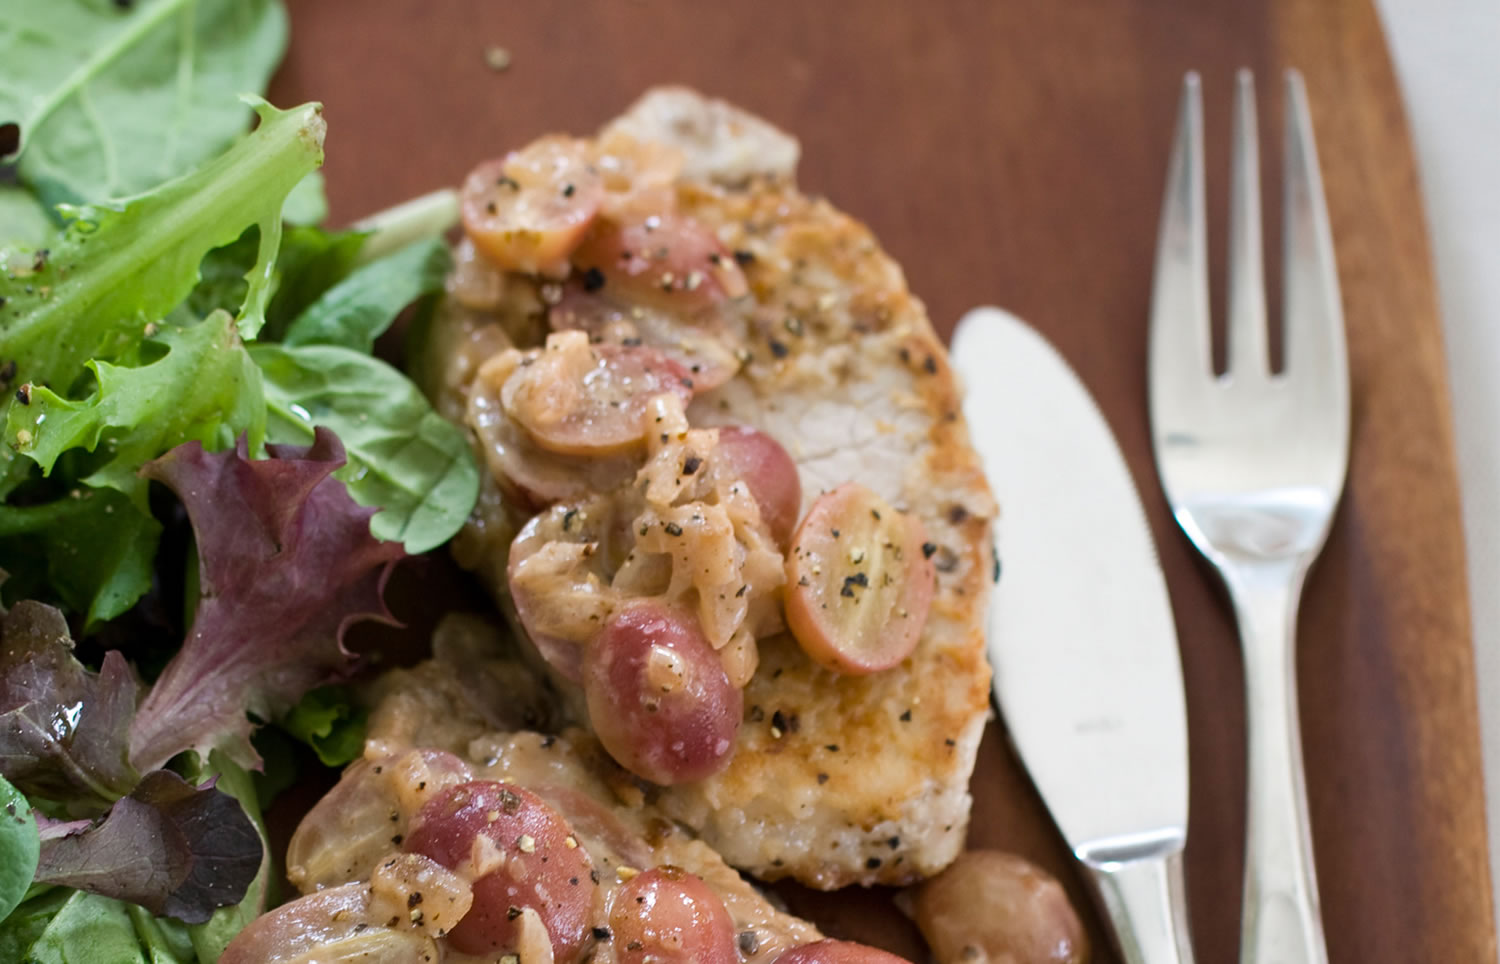 Sauteed Pork Chops With Grapes and Mustard Sauce shines because of the easy technique of making a pan sauce.